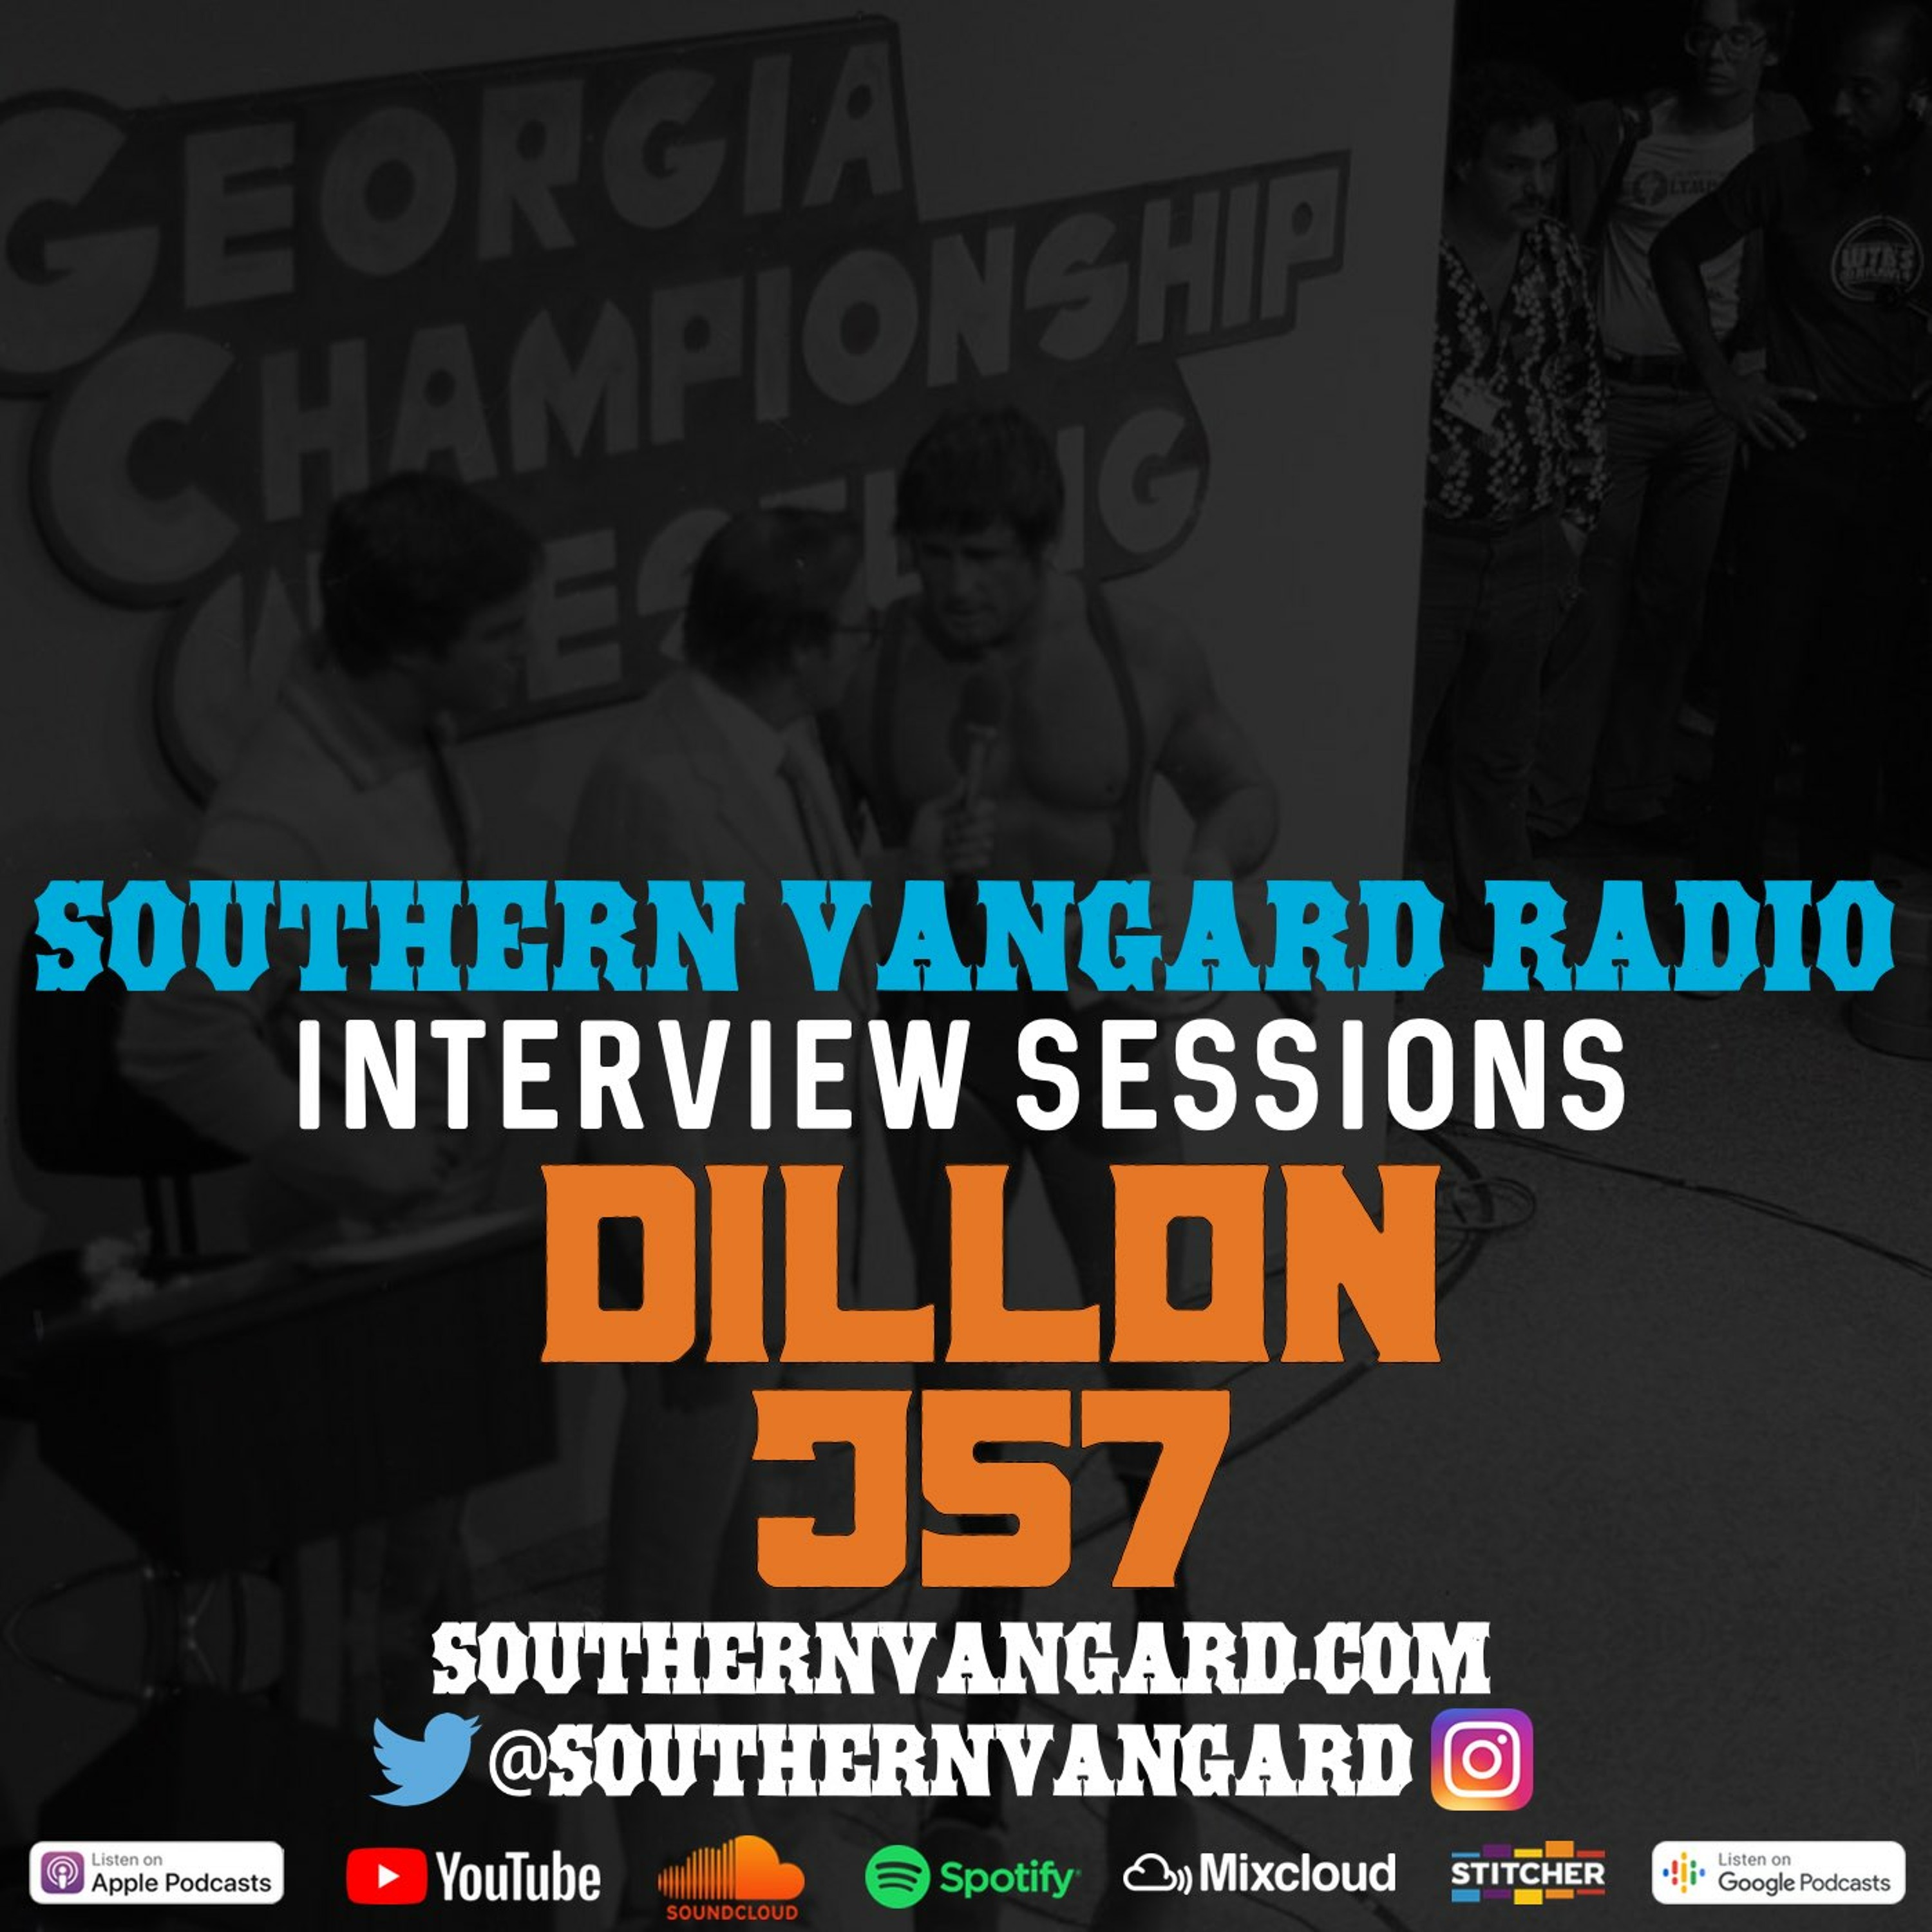 Dillon & J57 - Southern Vangard Radio Interview Sessions